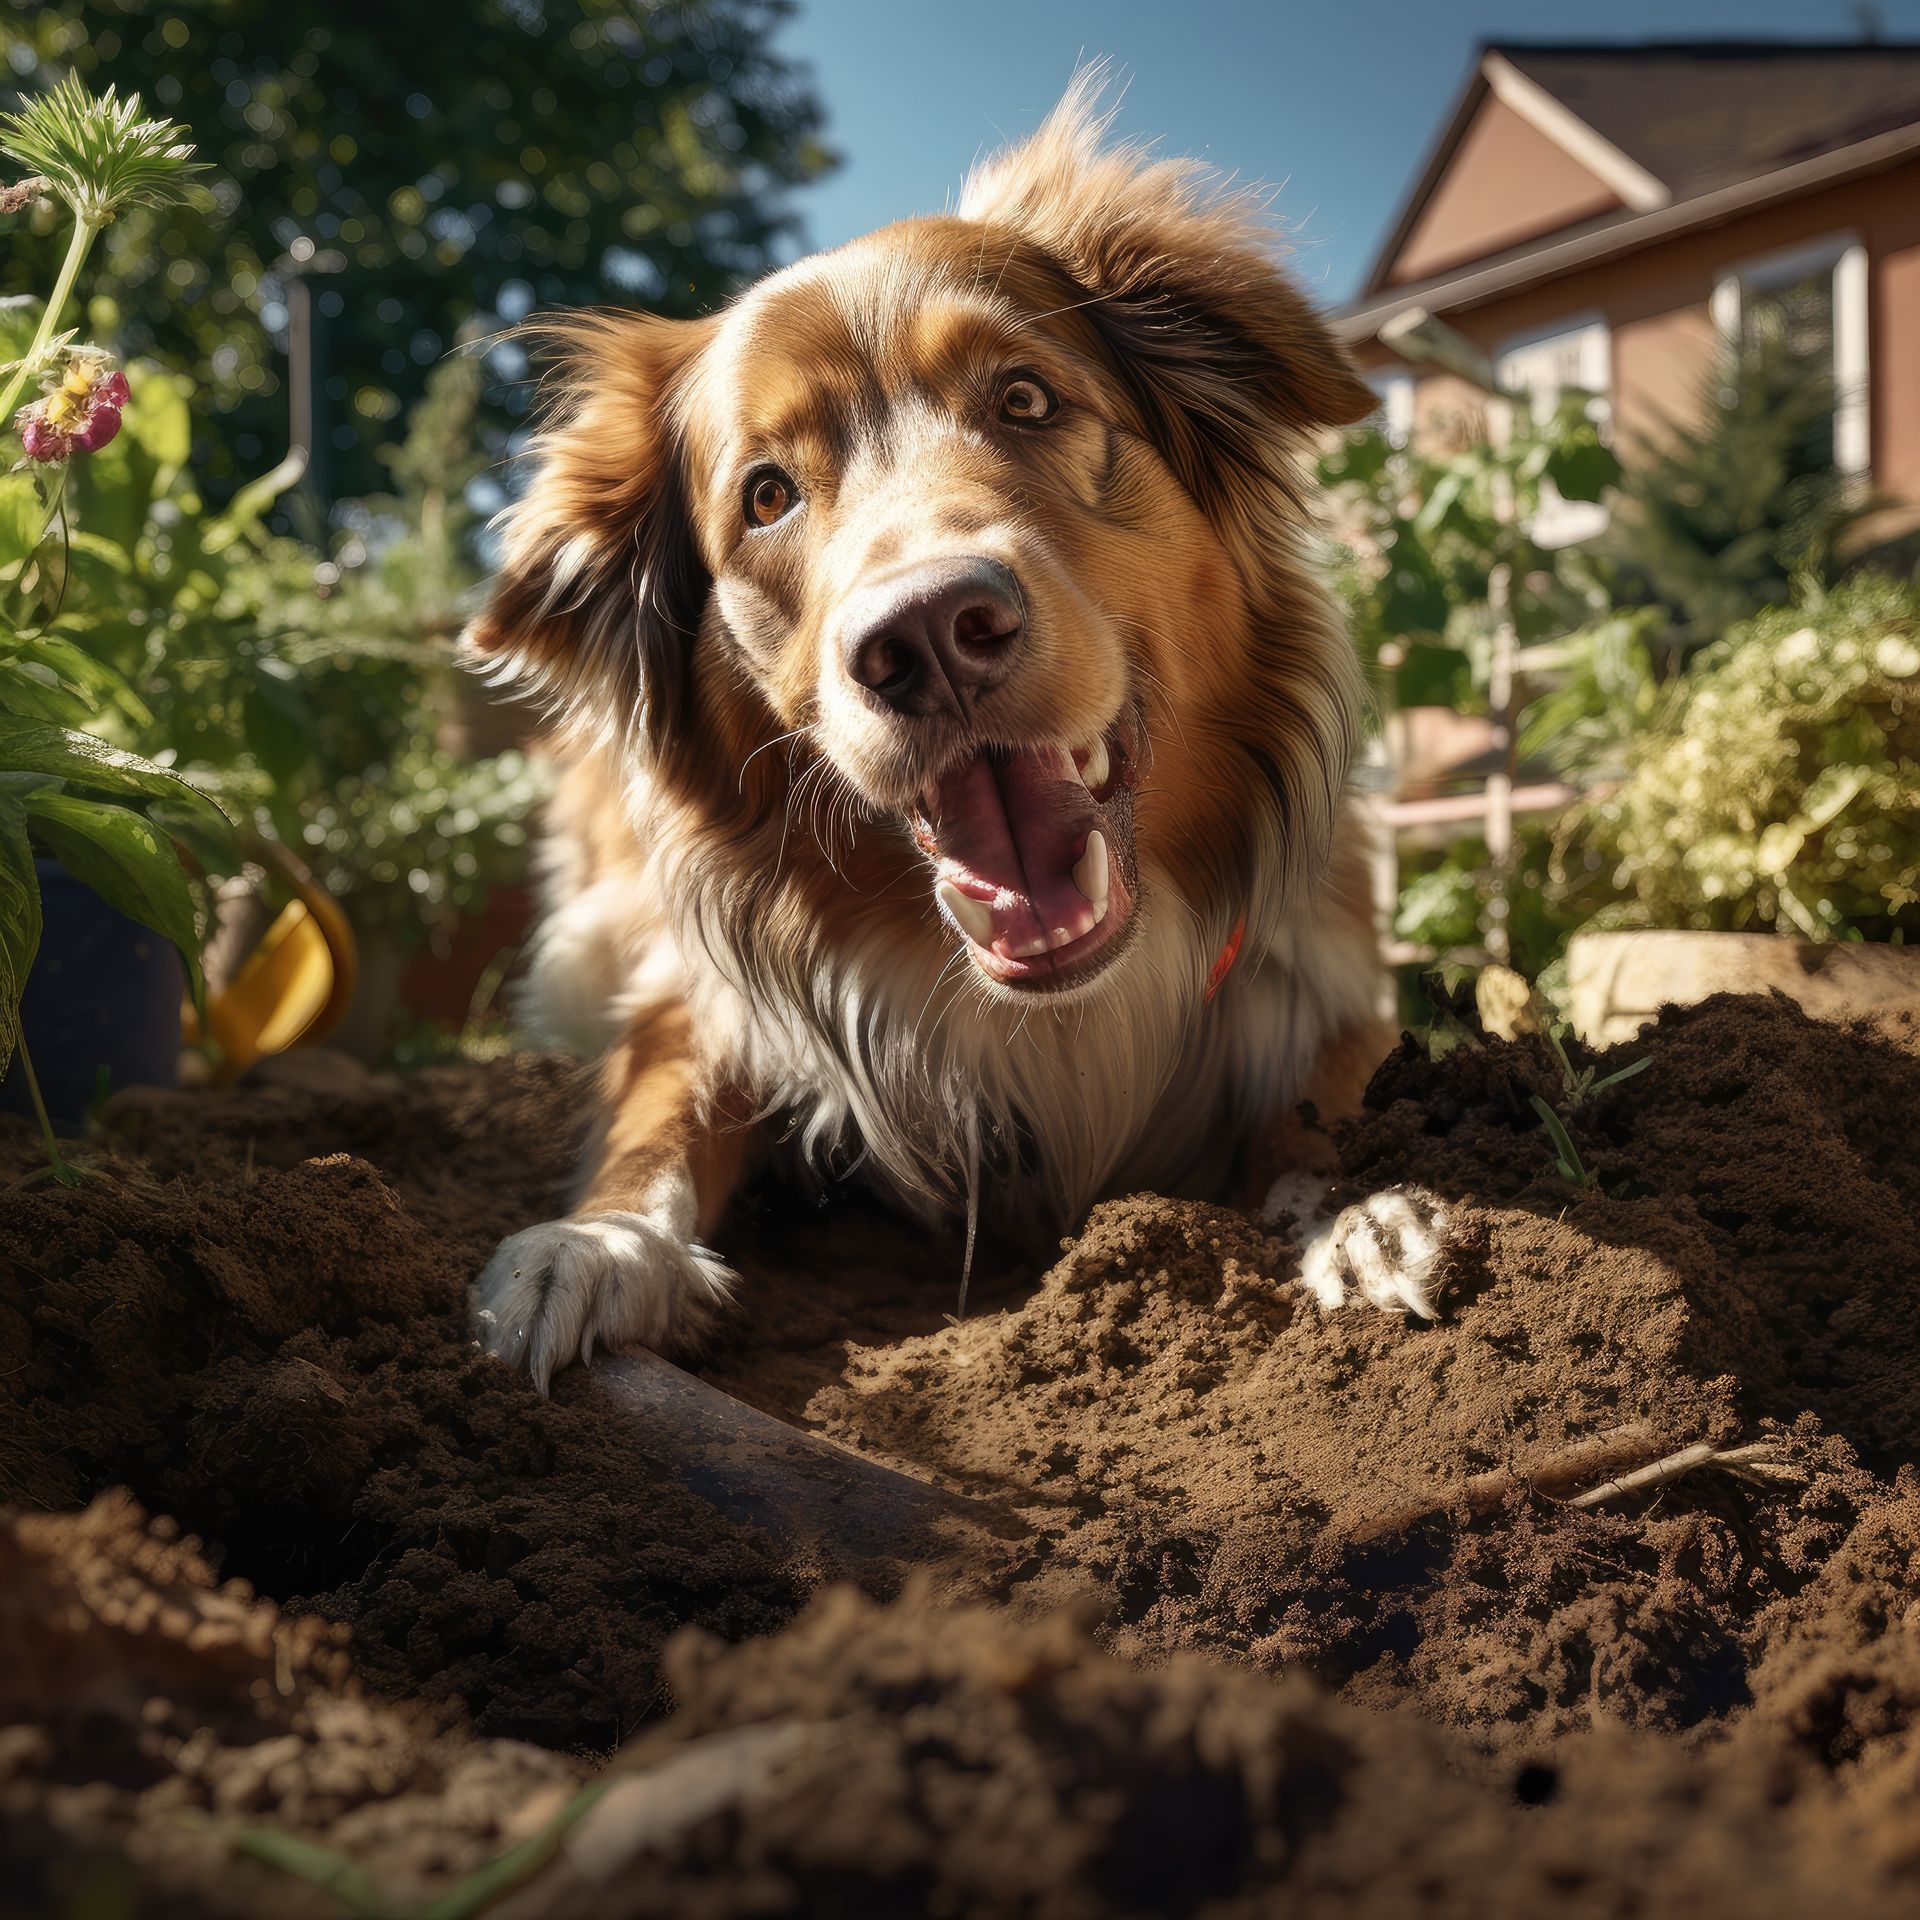 How to Keep Dogs from Digging Under Fence